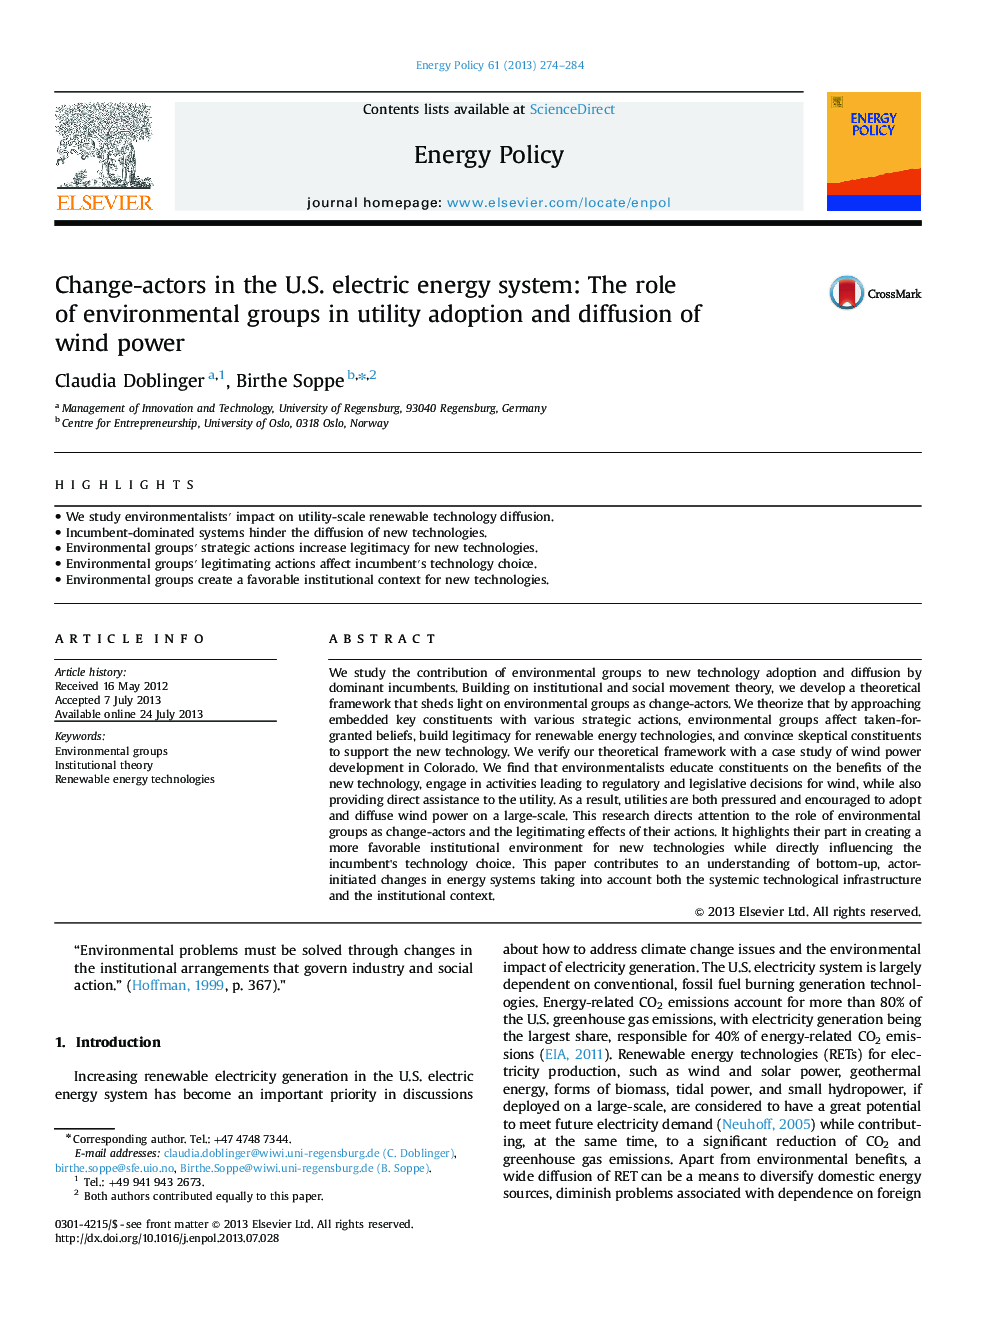 Change-actors in the U.S. electric energy system: The role of environmental groups in utility adoption and diffusion of wind power